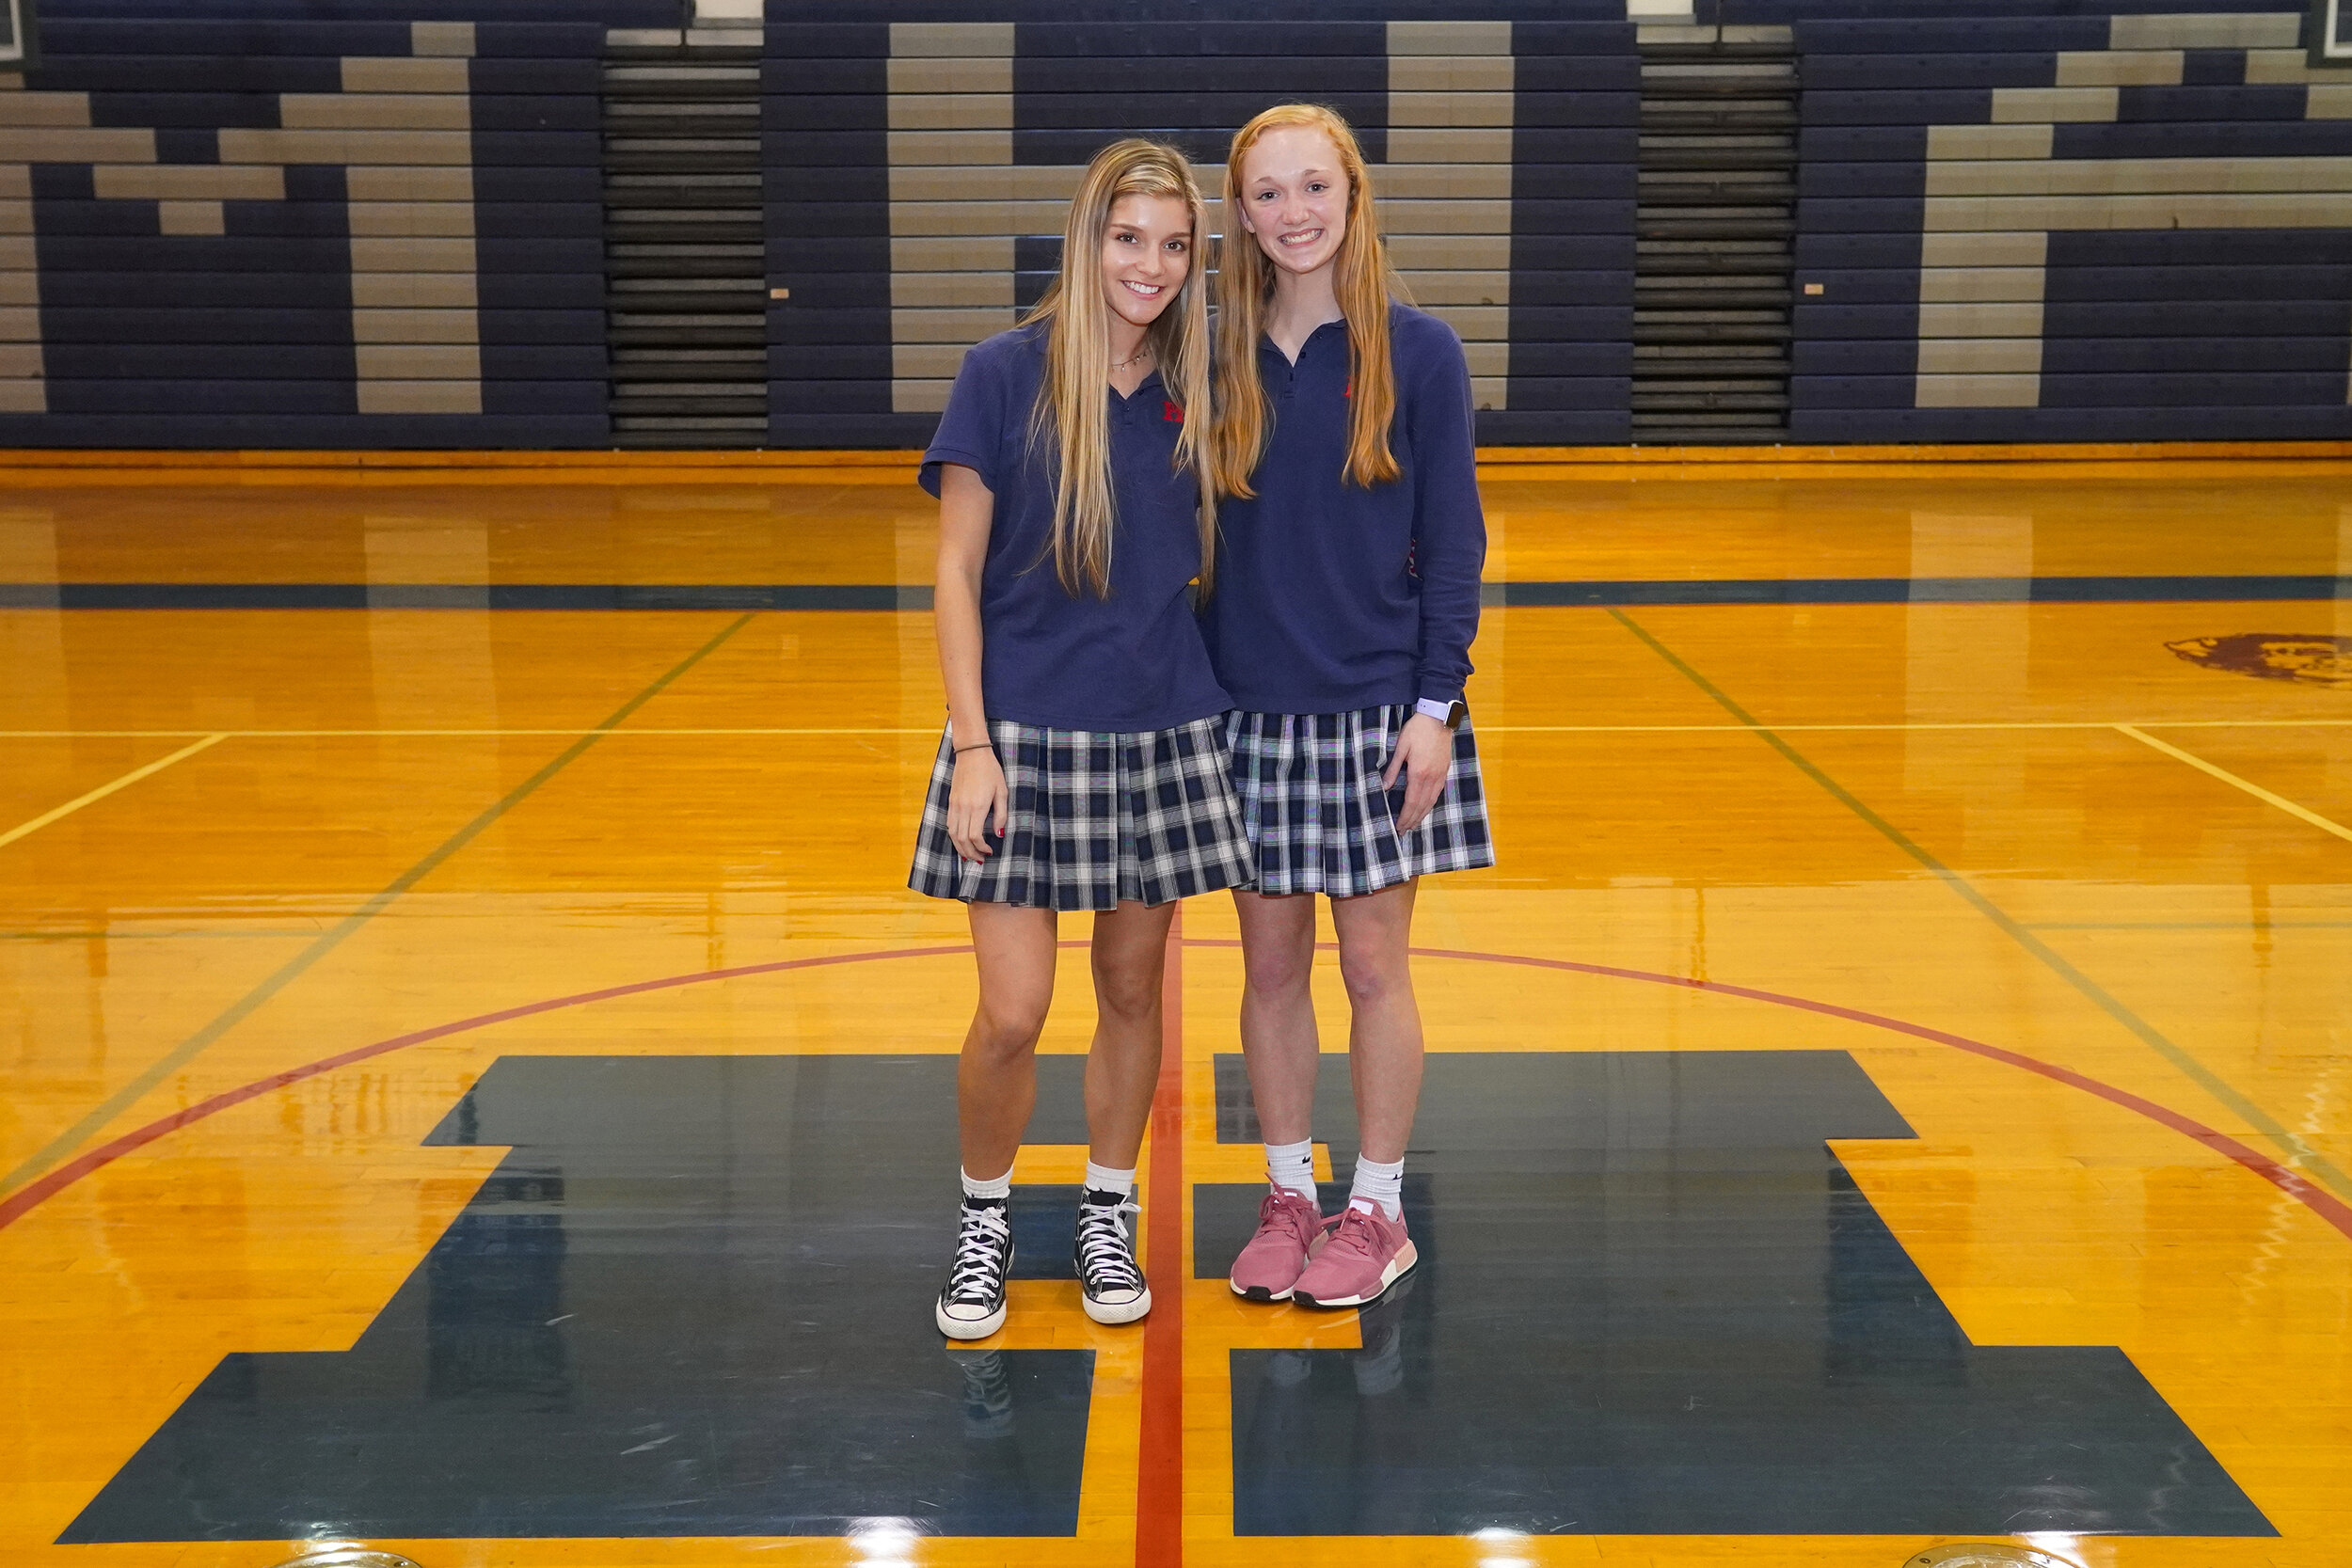 Sarah Kate Hinkle and Emily Patterson